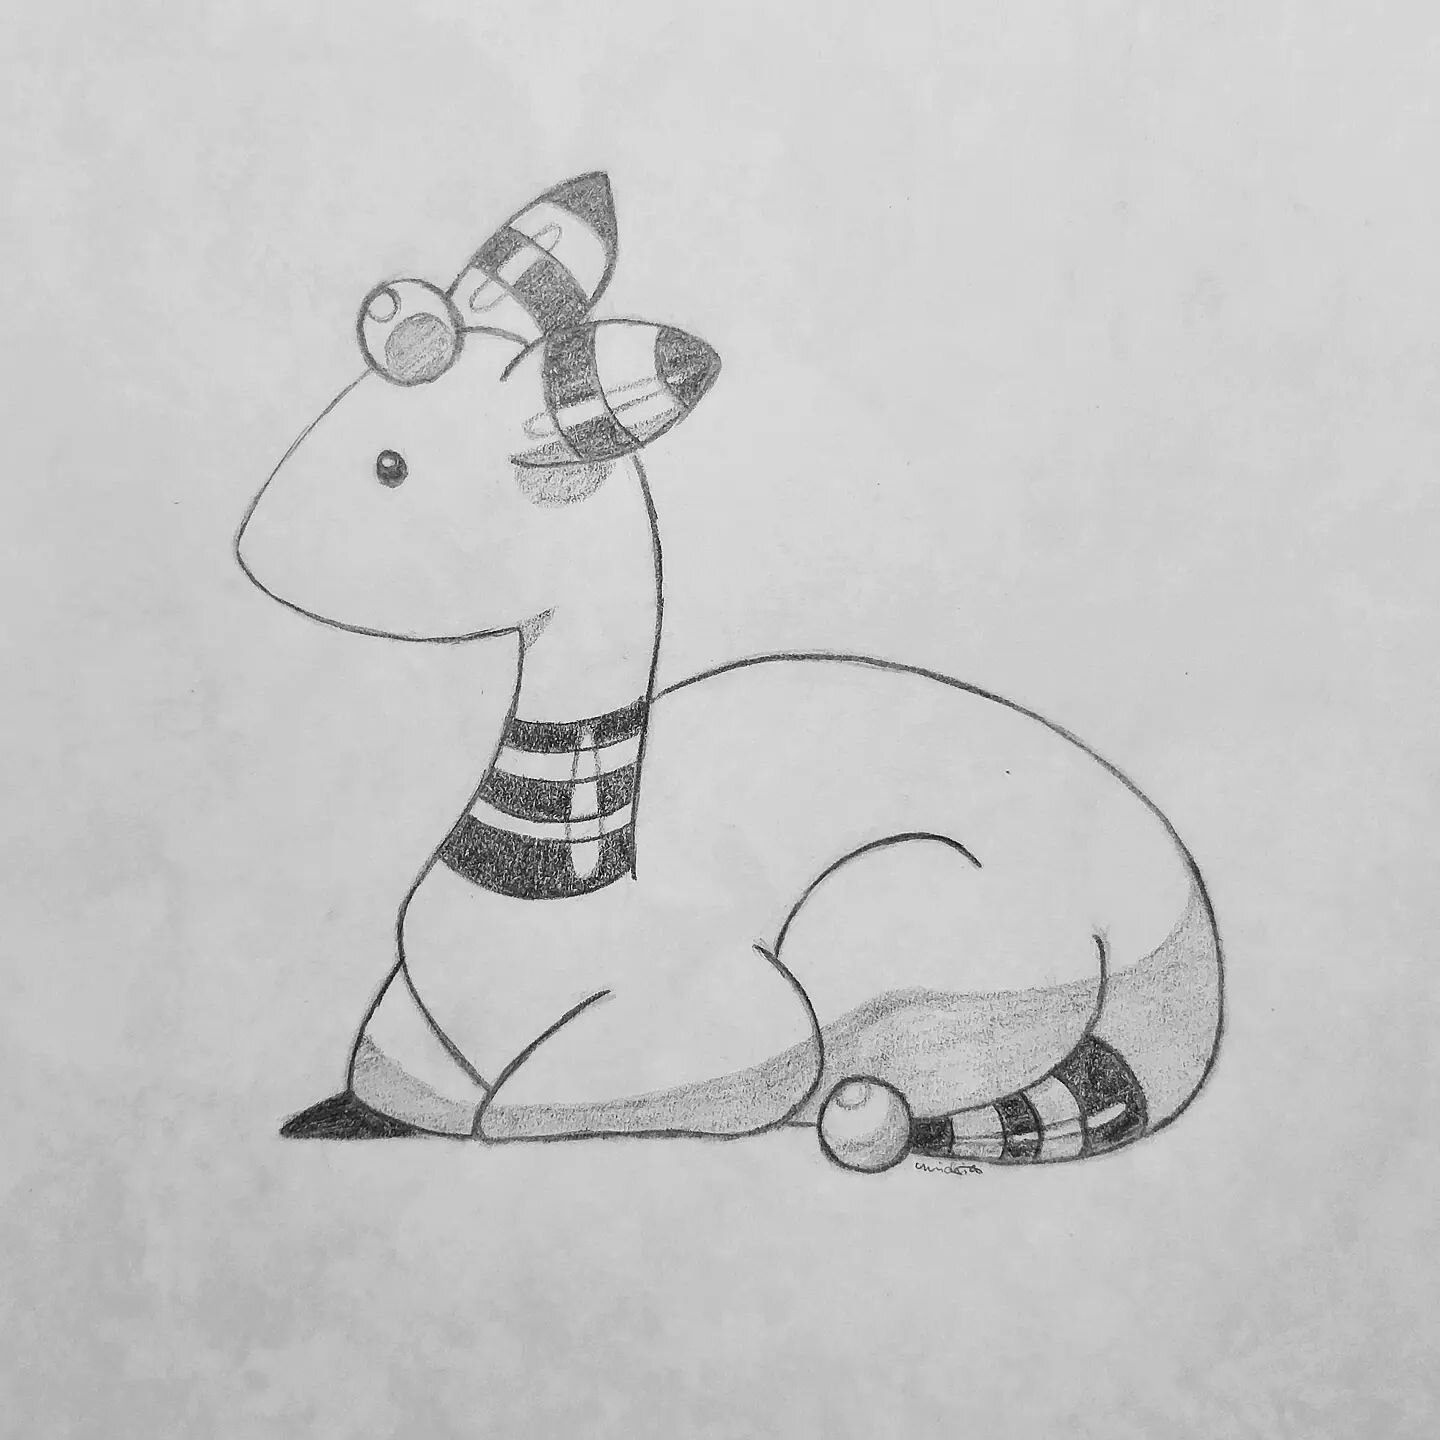 ☁️Sometimes you just need to draw Ampharos sitting and looking adorable☁️
.
#canadianartist#artmontreal#montrealillustrator#blackandwhiteillustration#blackworkillustration#drawstagram#illustratedmonthly#inkandpaper#inkartwork#pencildrawing#fanart#mon